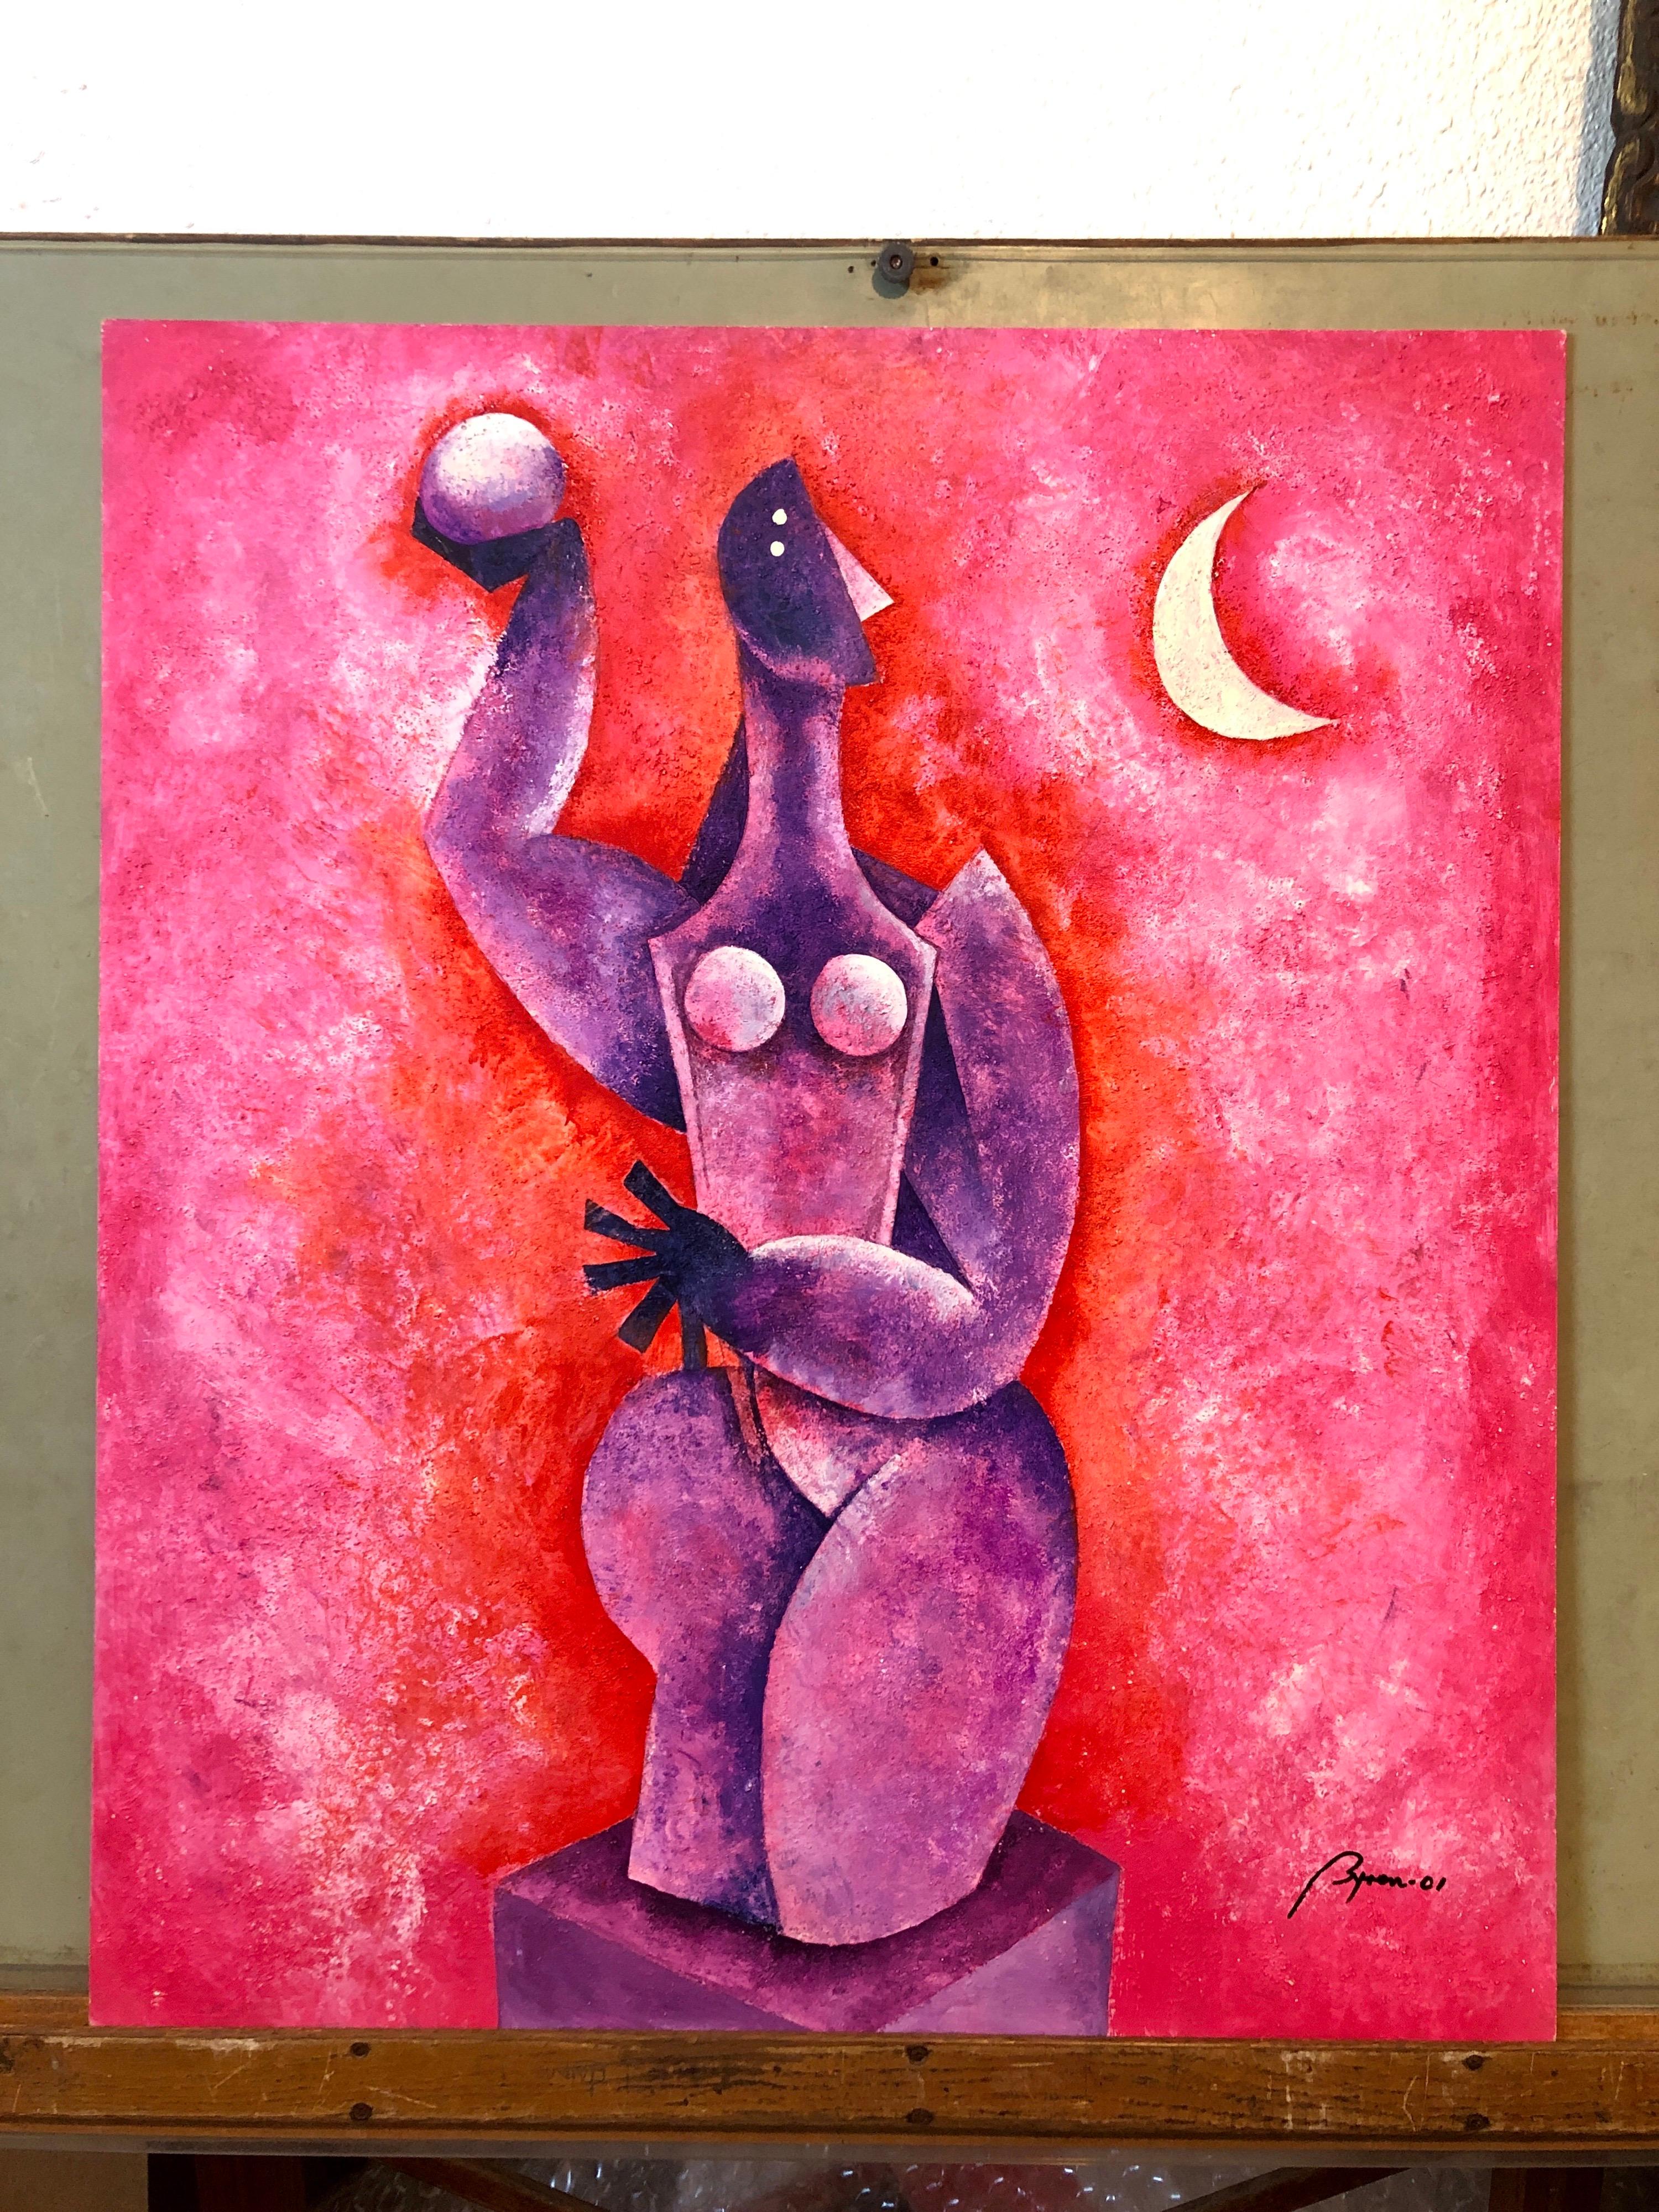 Untitled, Cubist Nude, 2001 Latin American Textured Painting - Pink Nude Painting by Byron Gálvez